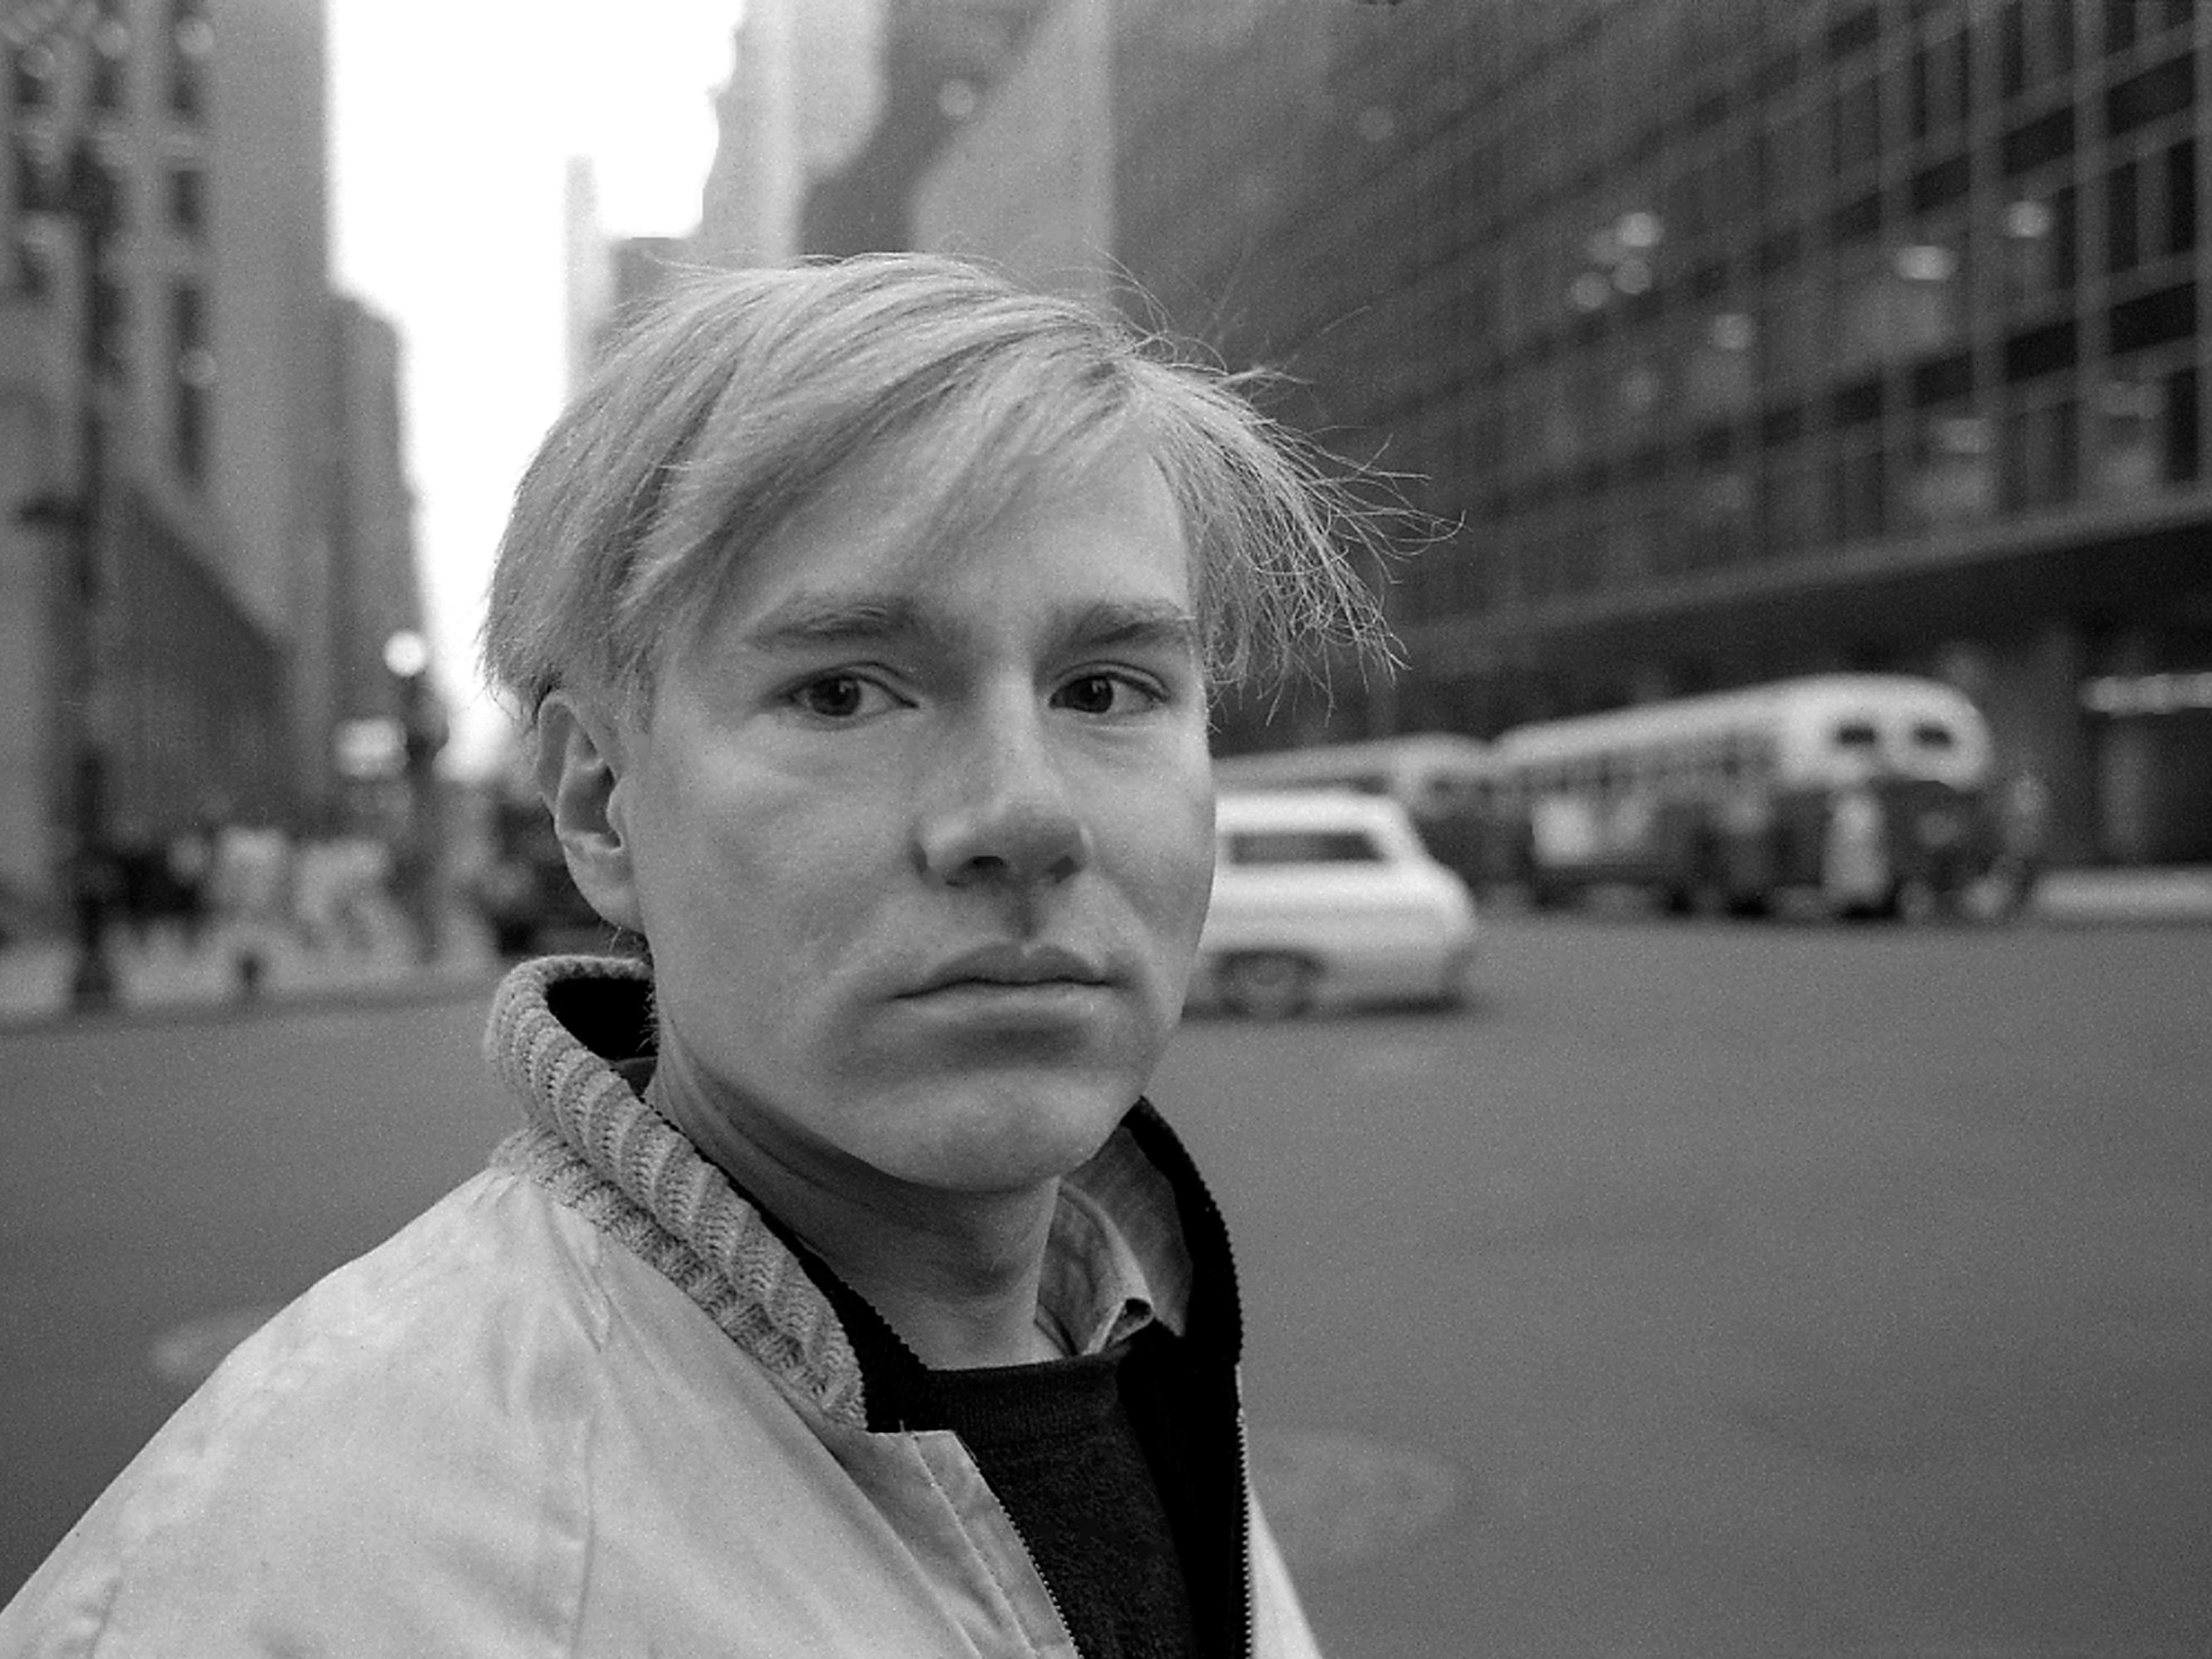 Andy Warhol wears a light colored jacket and stands in the middle of the street.